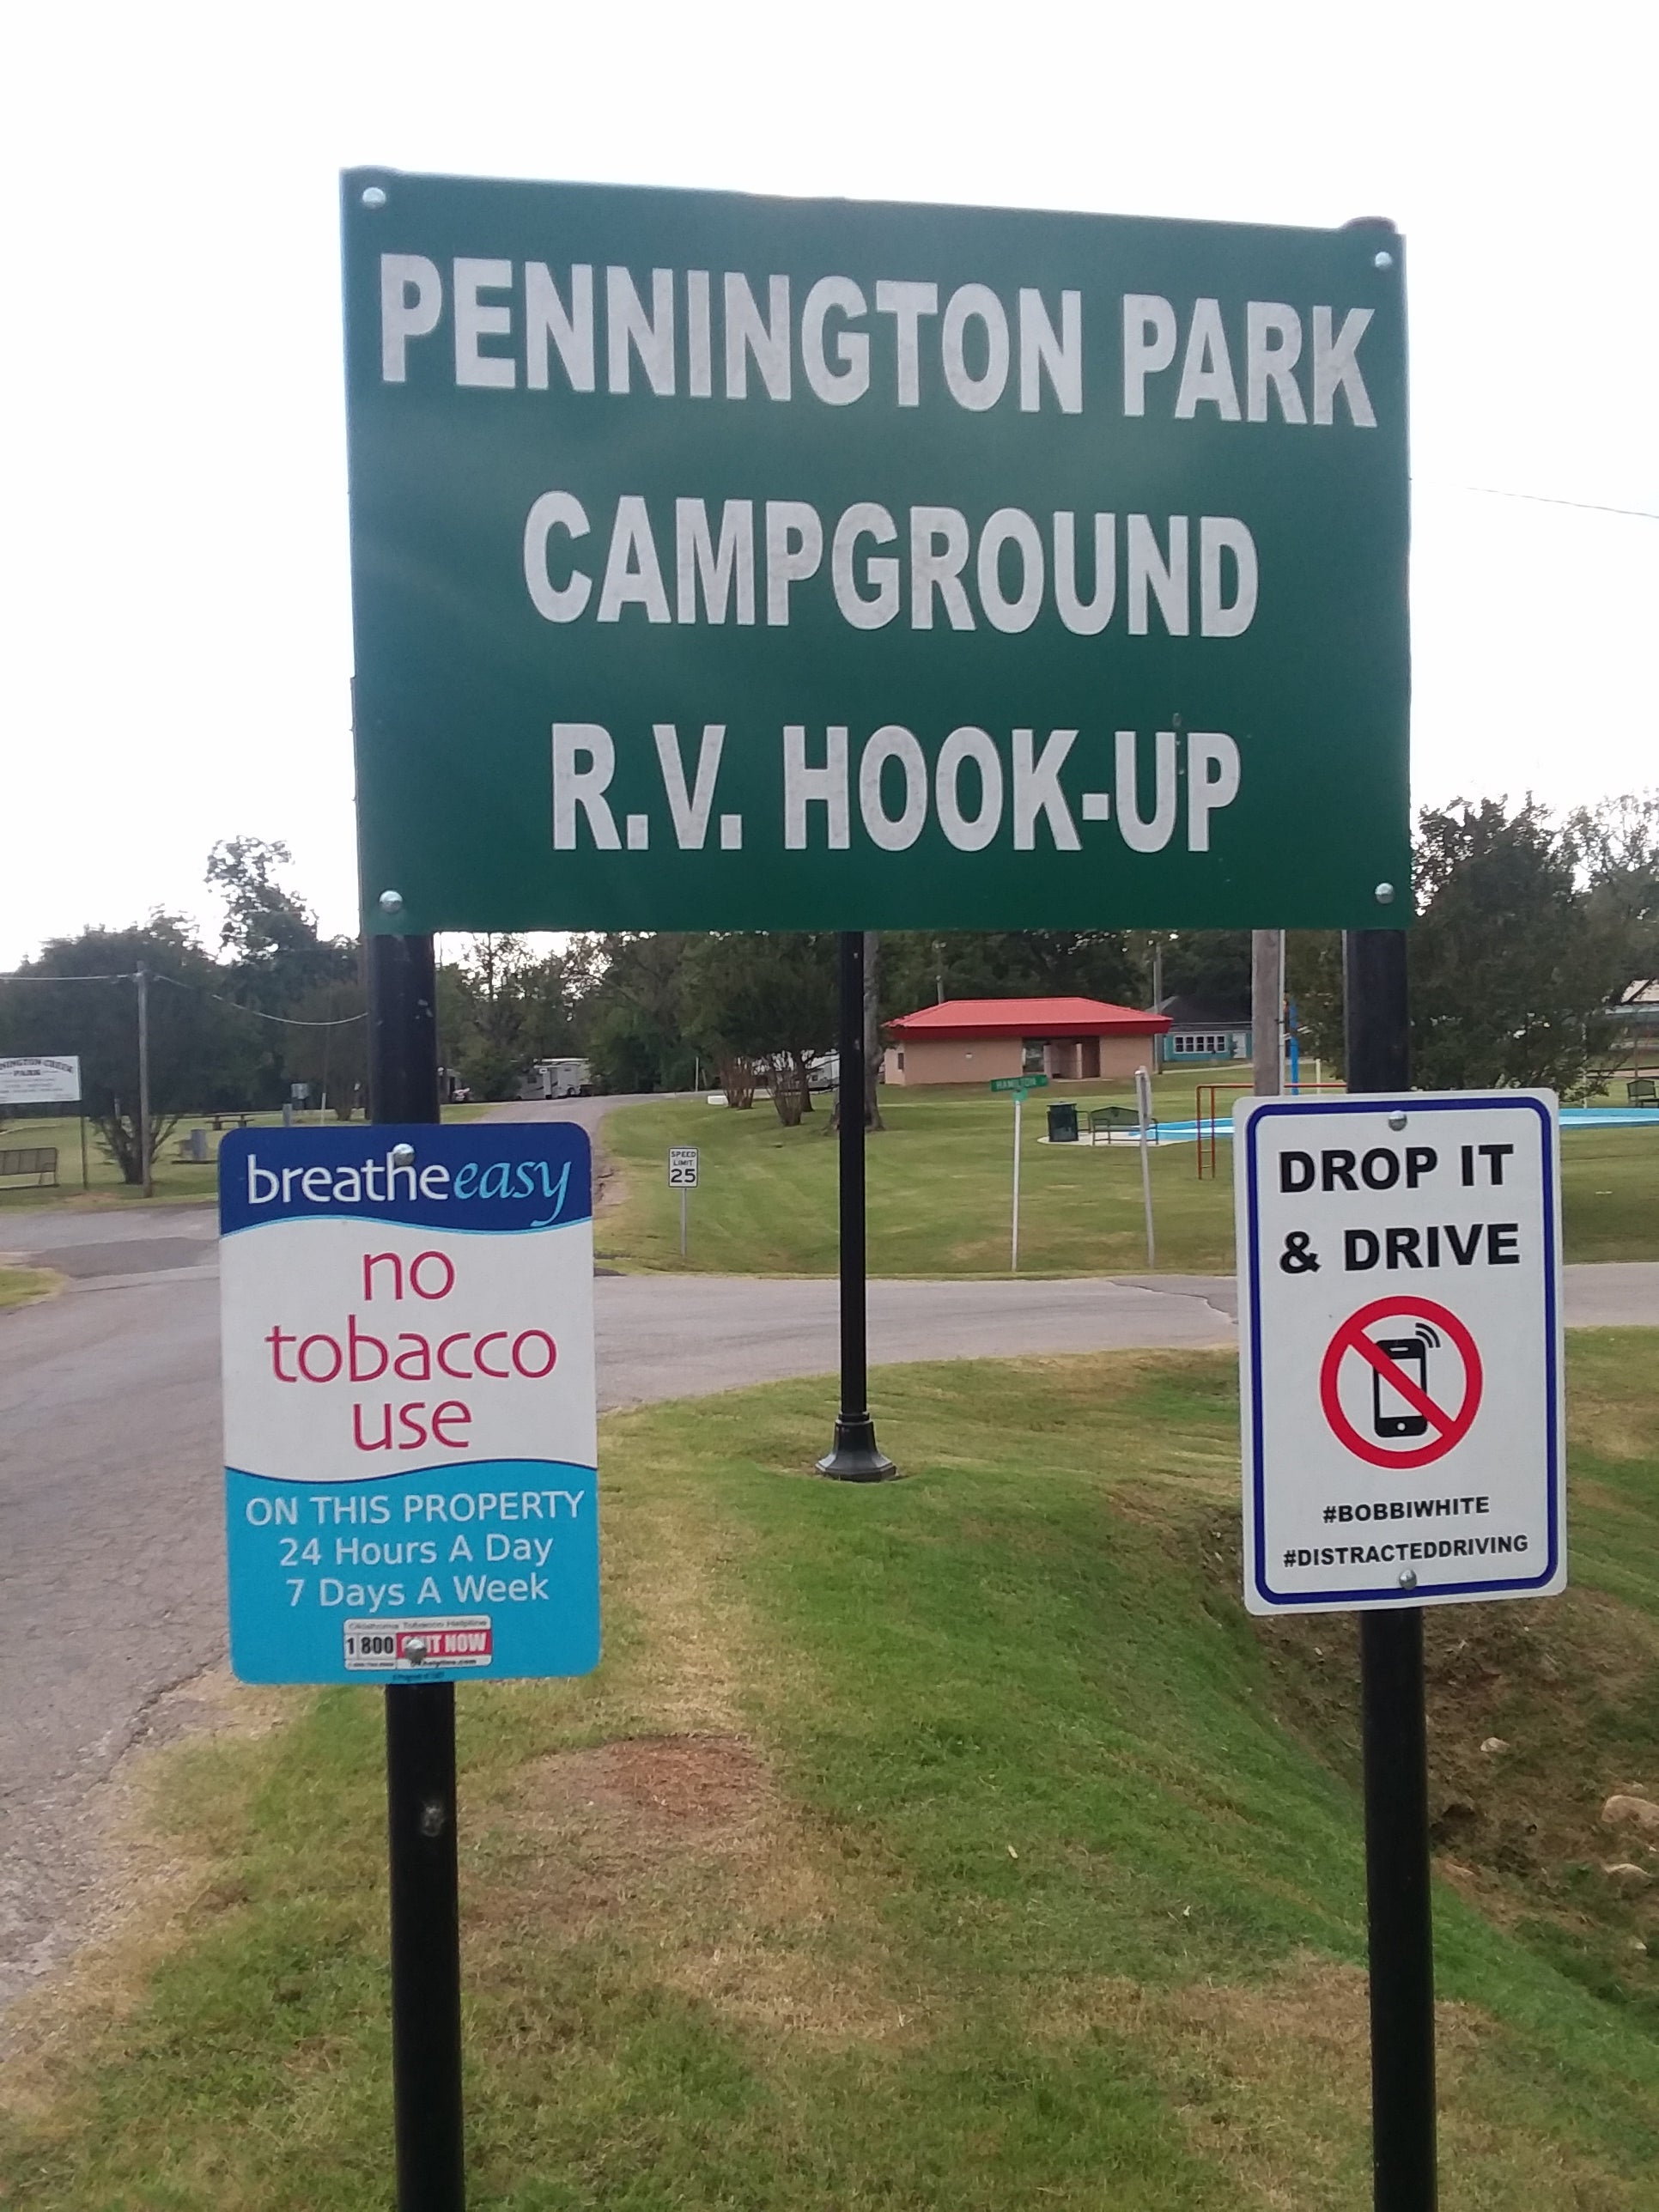 Camper submitted image from Pennington Creek Park - 1